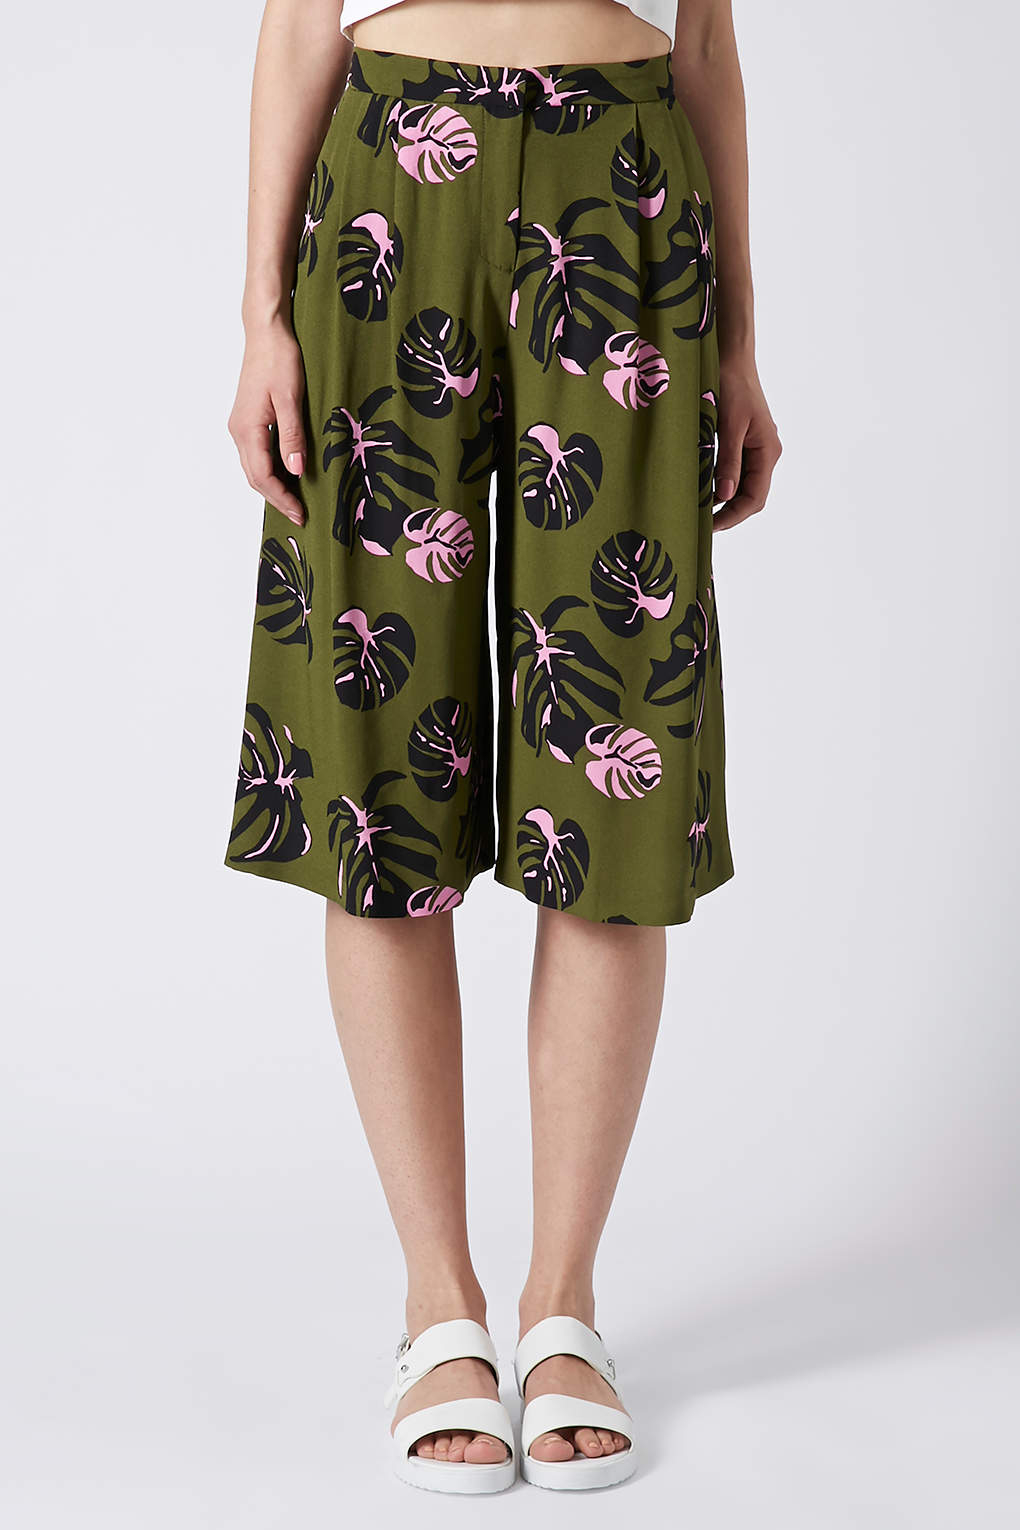 Lyst - Topshop Petite Tropical Print Culottes in Pink